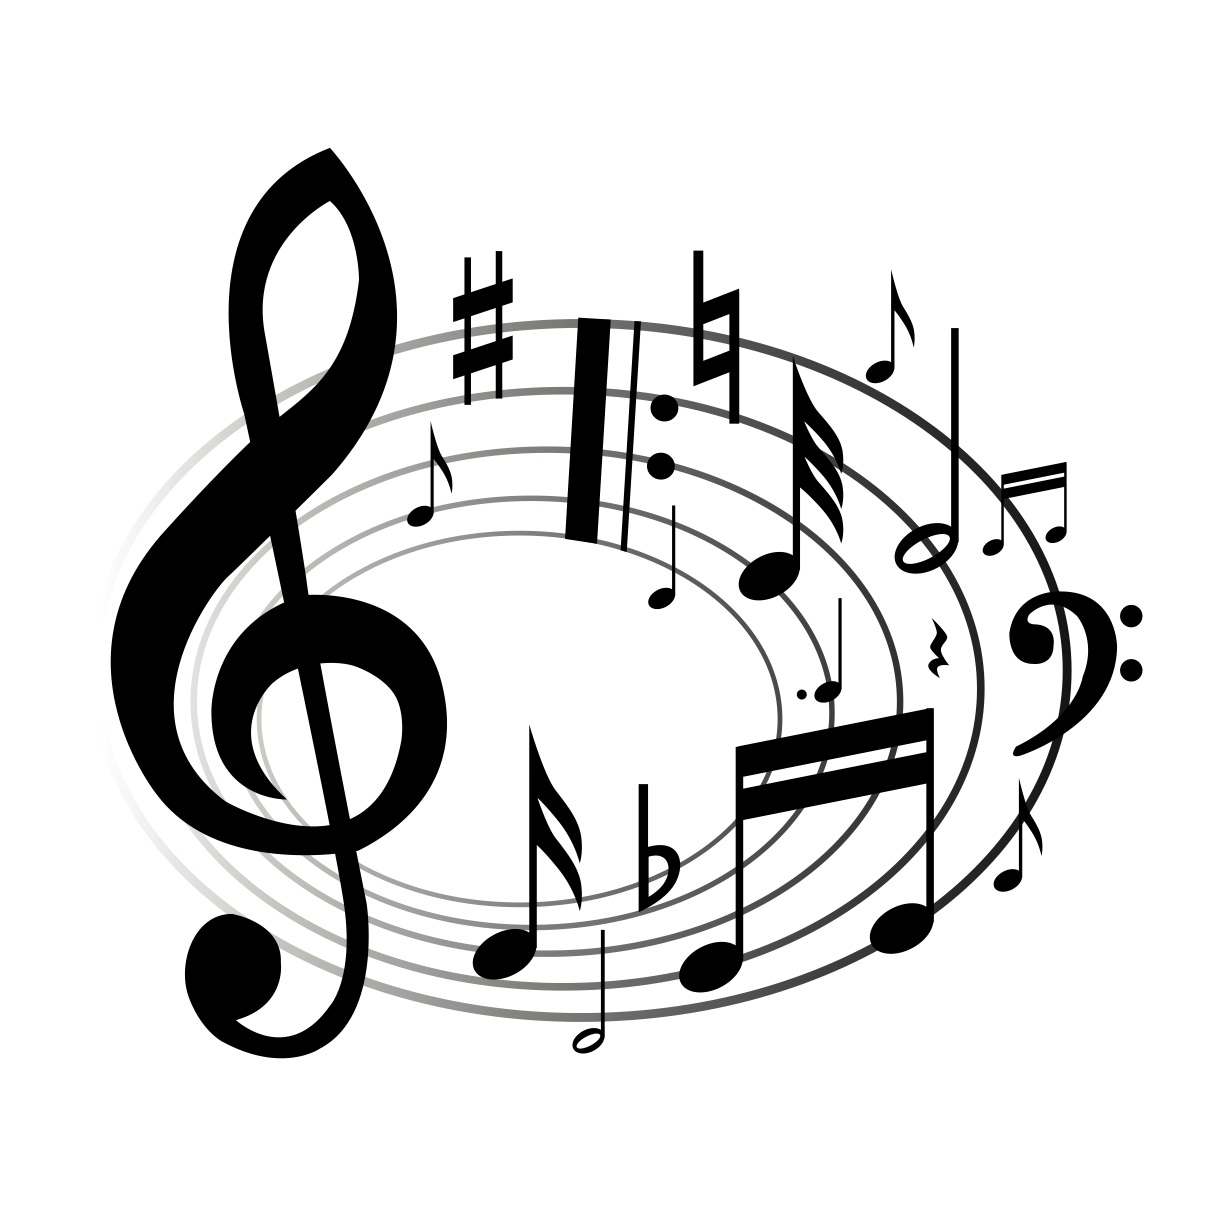 Clipart Music Notes Free | Clipart Panda - Free Clipart Images